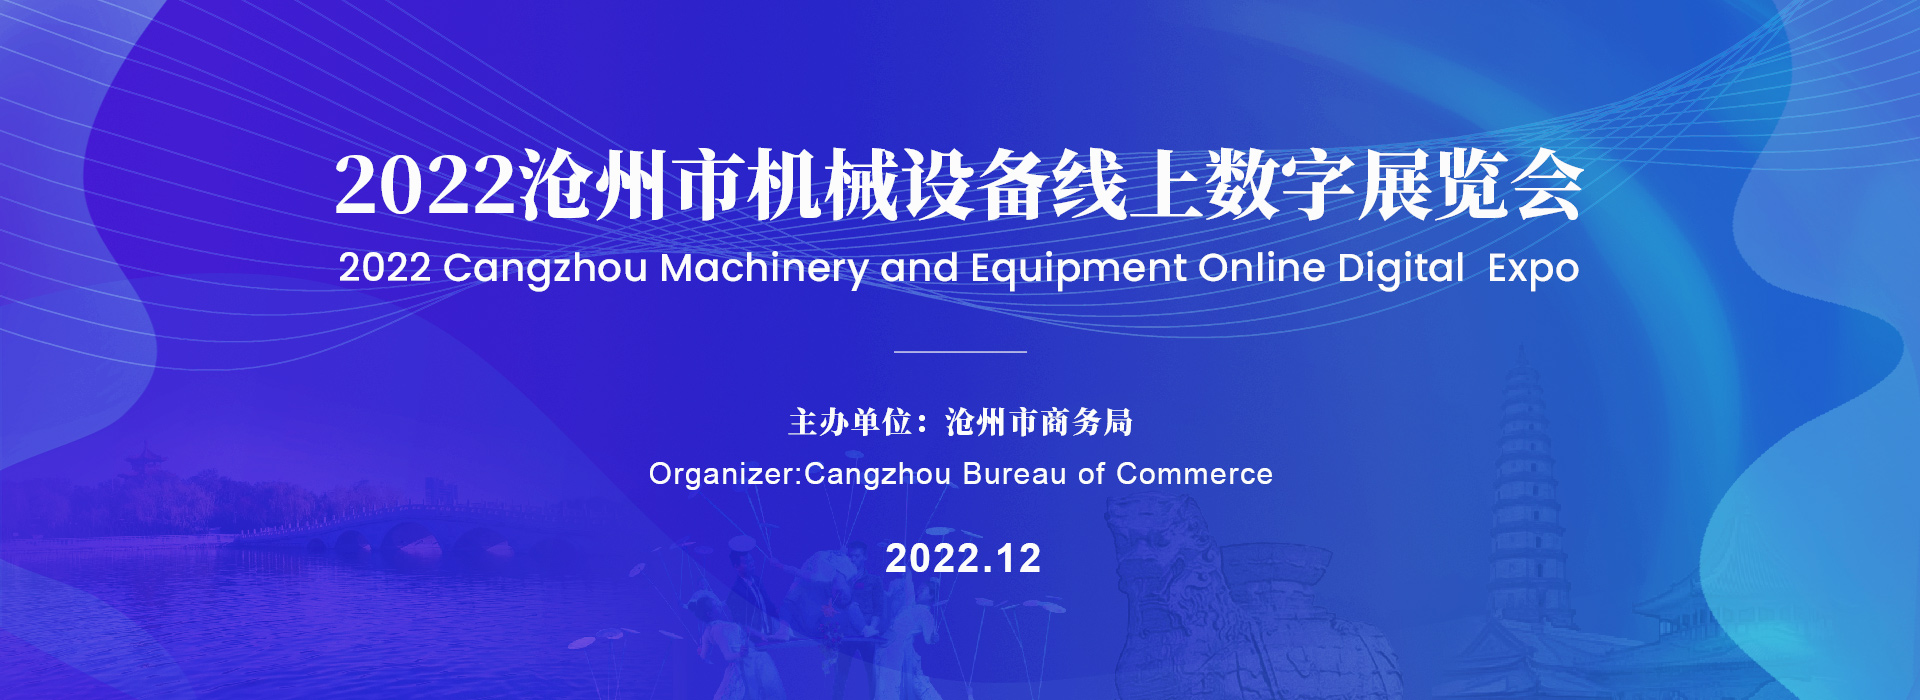 Machinery and Equipment Online Digital expo